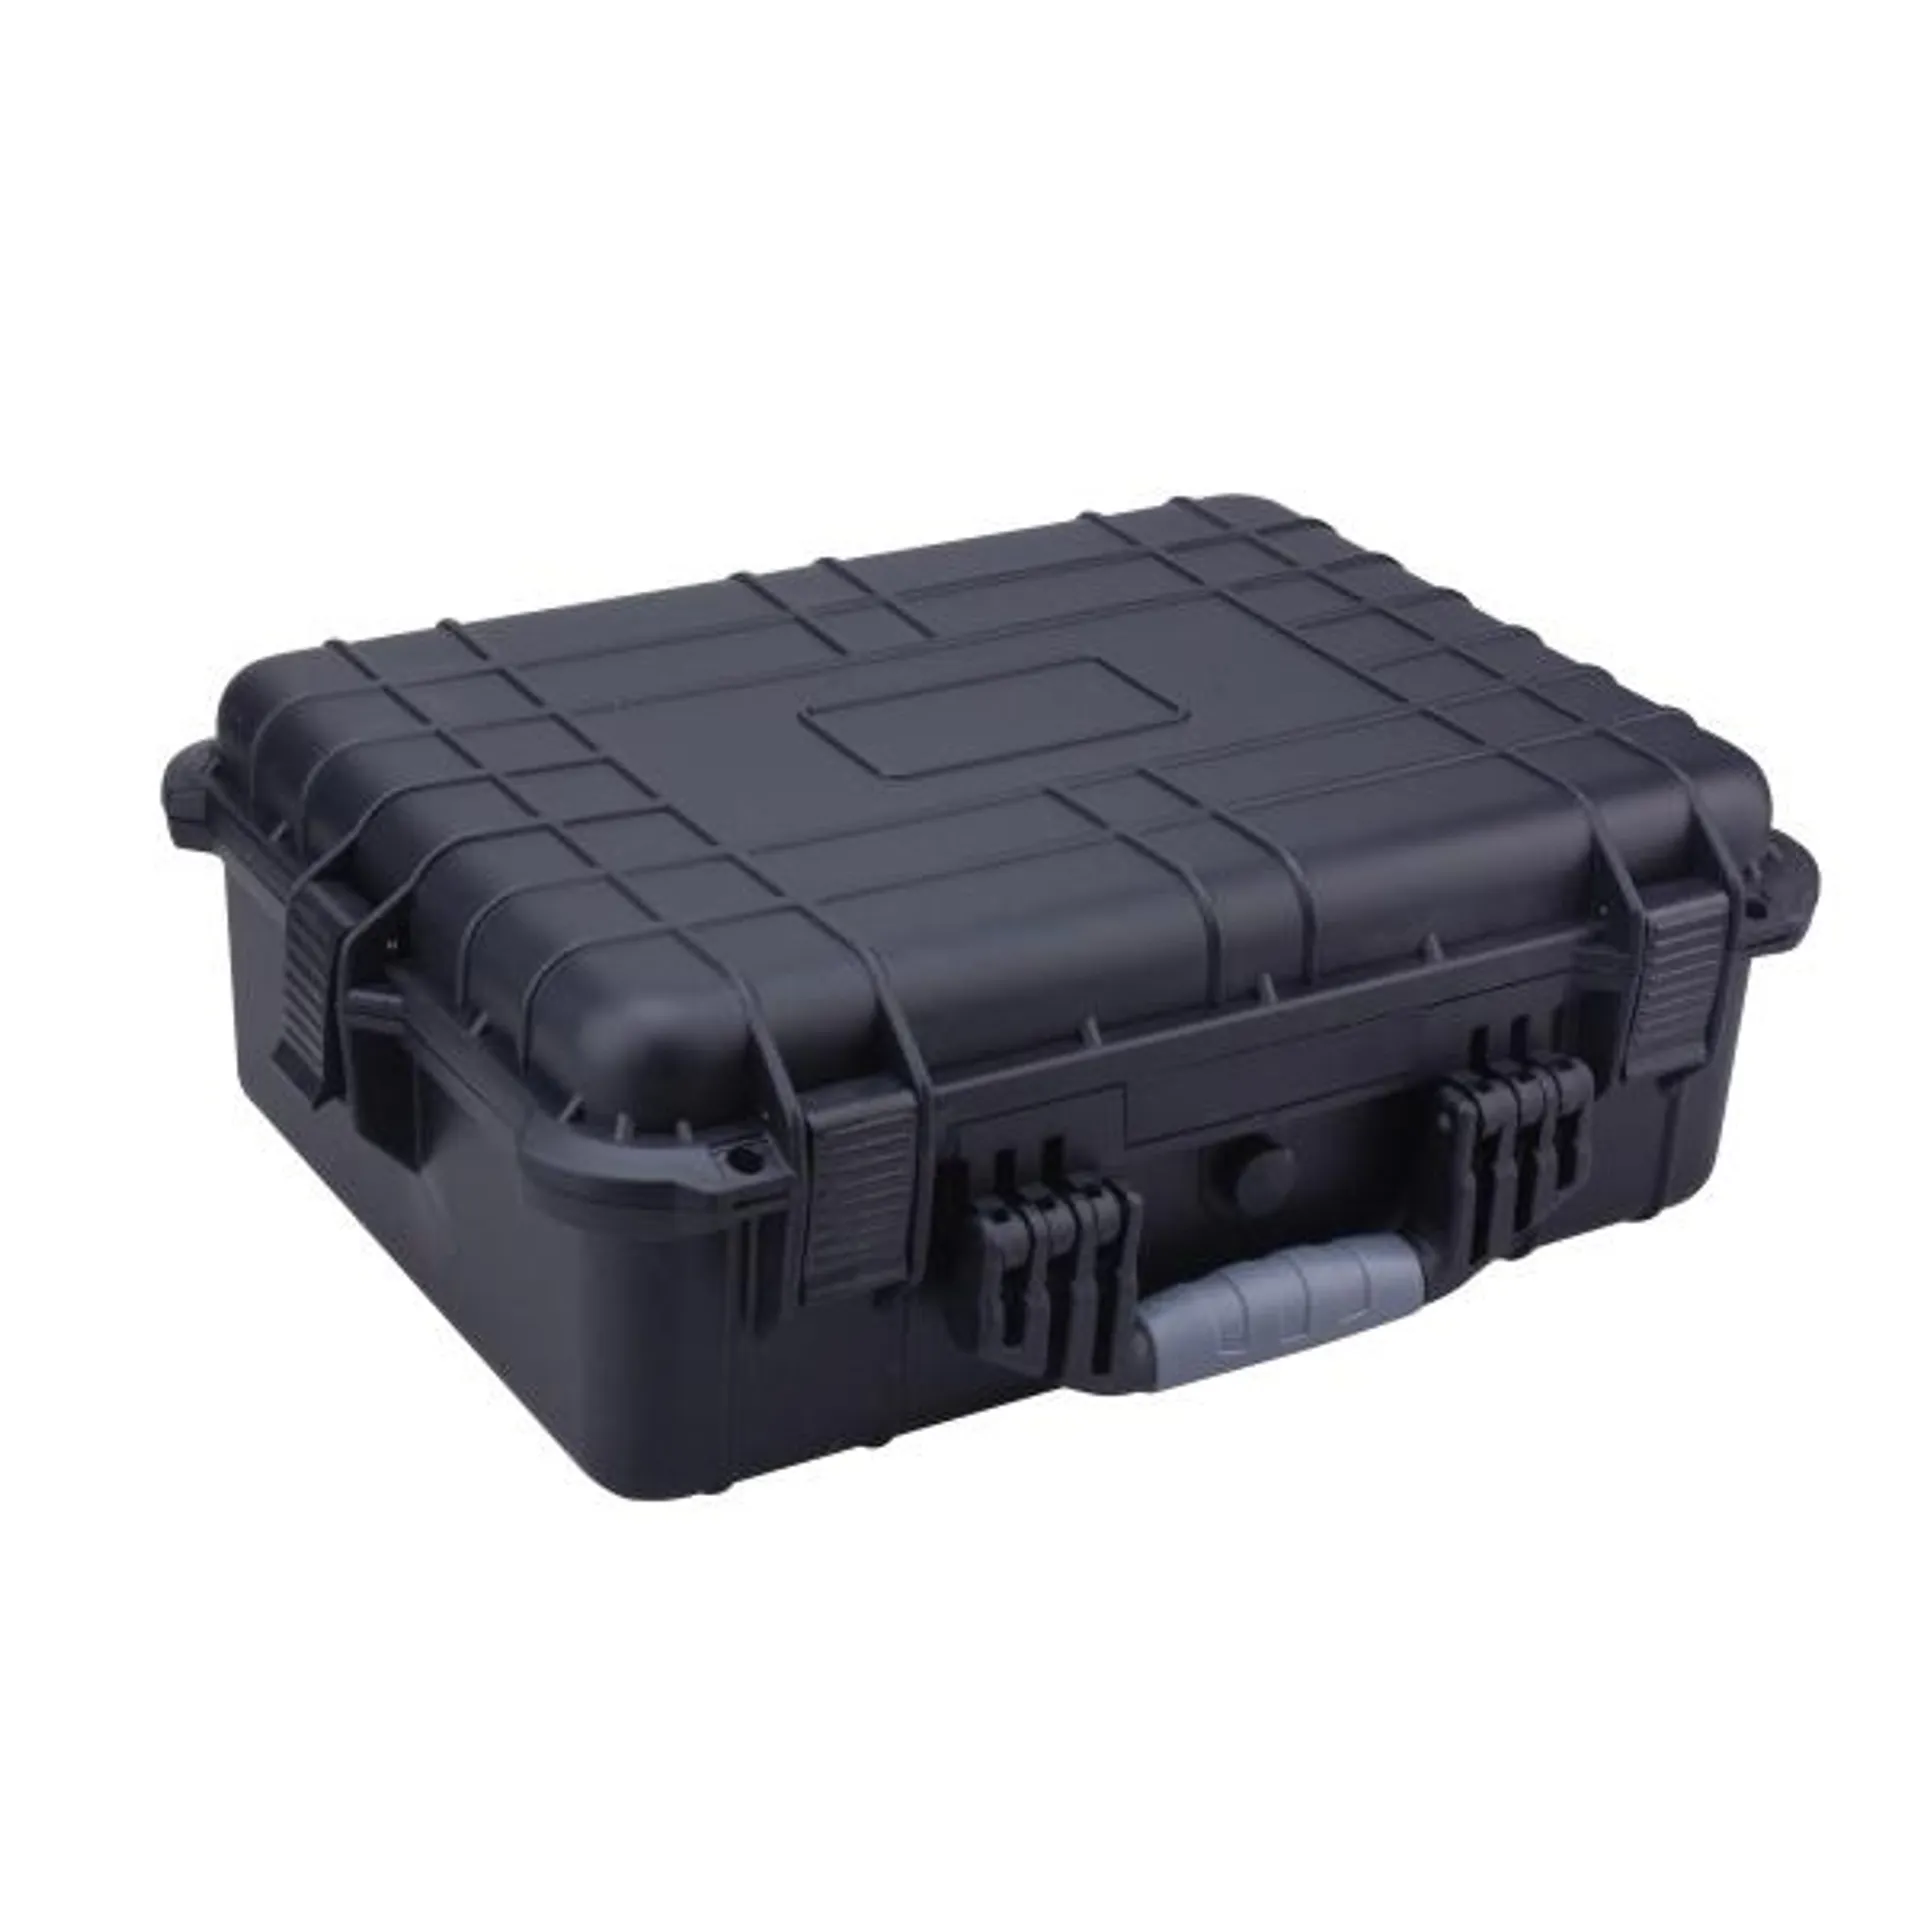 Extra Large Watertight Protective Case